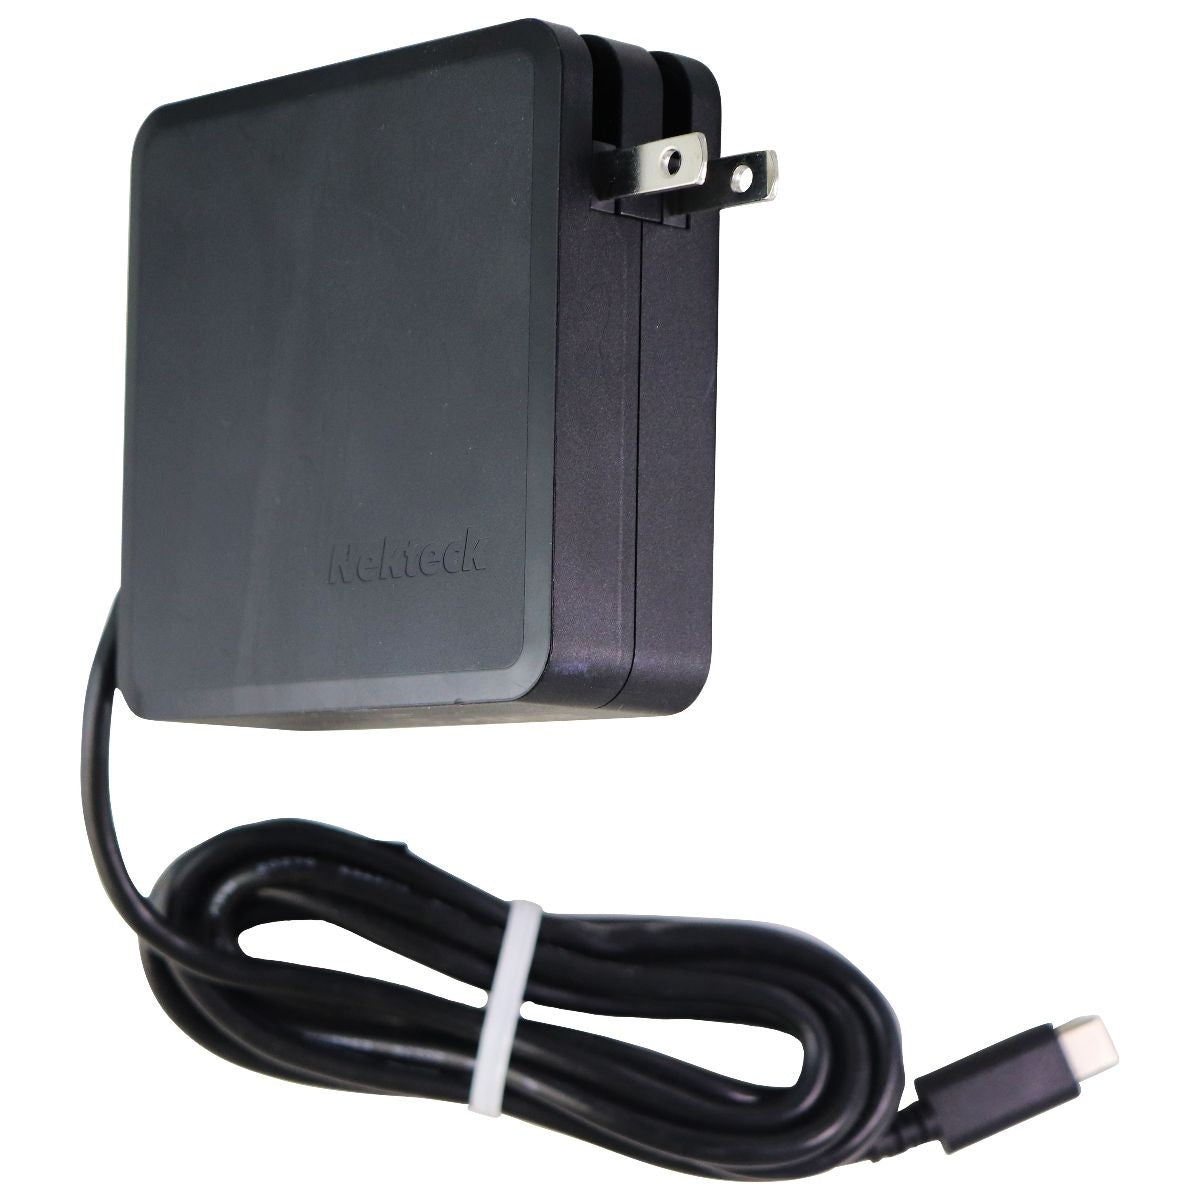 NewTeck 90W Type C Wall Adapter for Laptops & More - Black (HKA09020045-2U) Multipurpose Batteries & Power - Multipurpose AC to DC Adapters NewTeck    - Simple Cell Bulk Wholesale Pricing - USA Seller